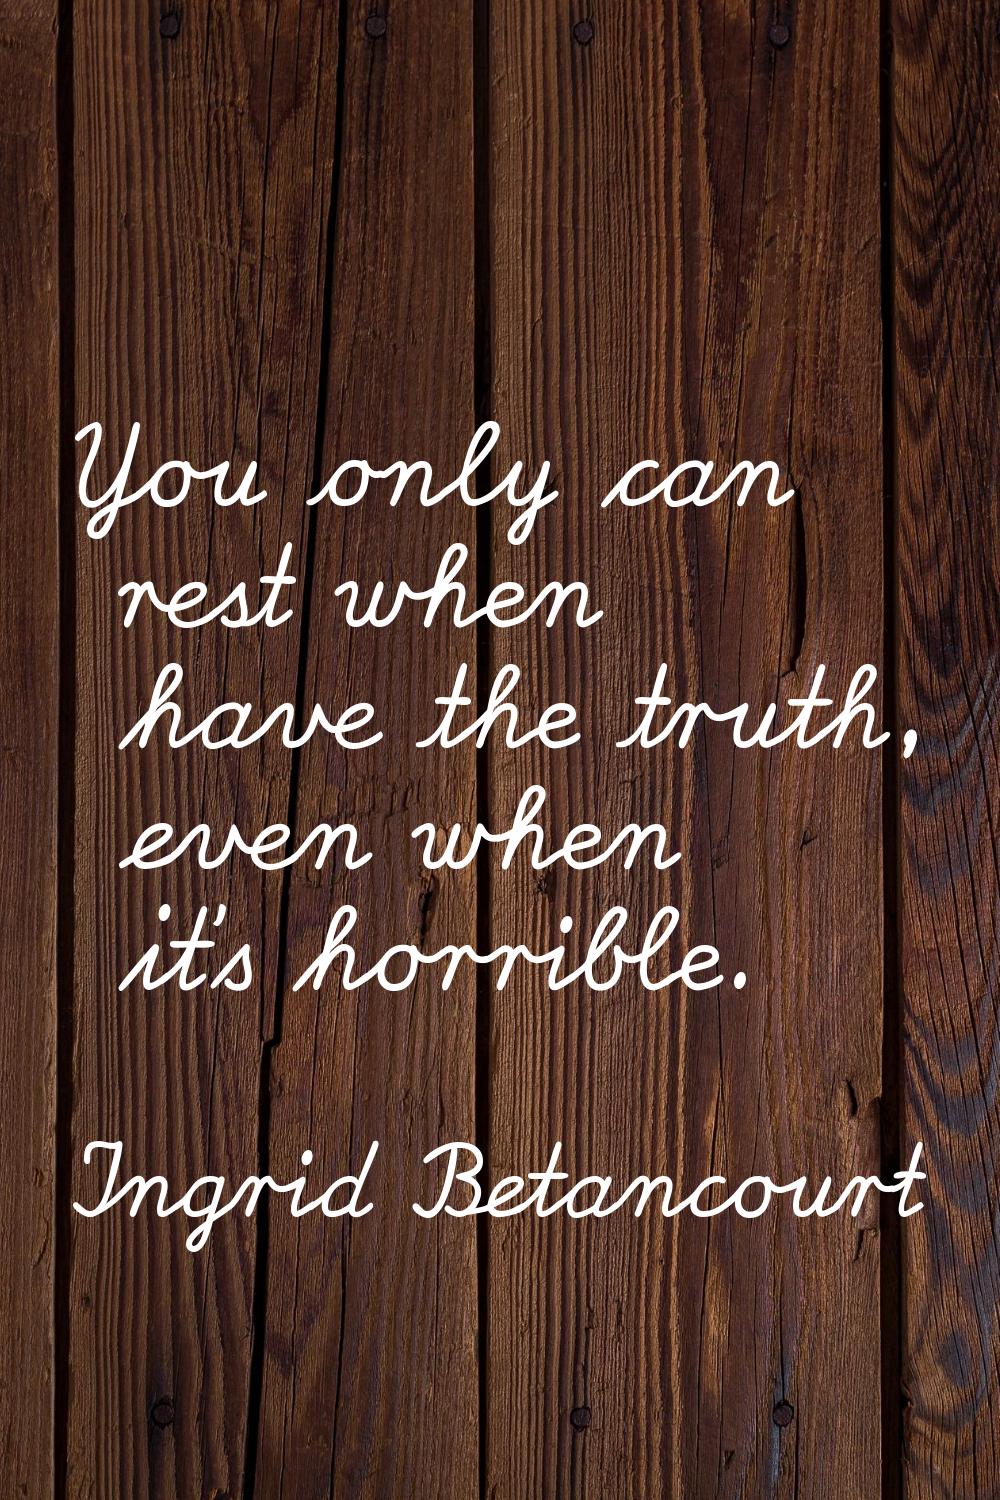 You only can rest when have the truth, even when it's horrible.